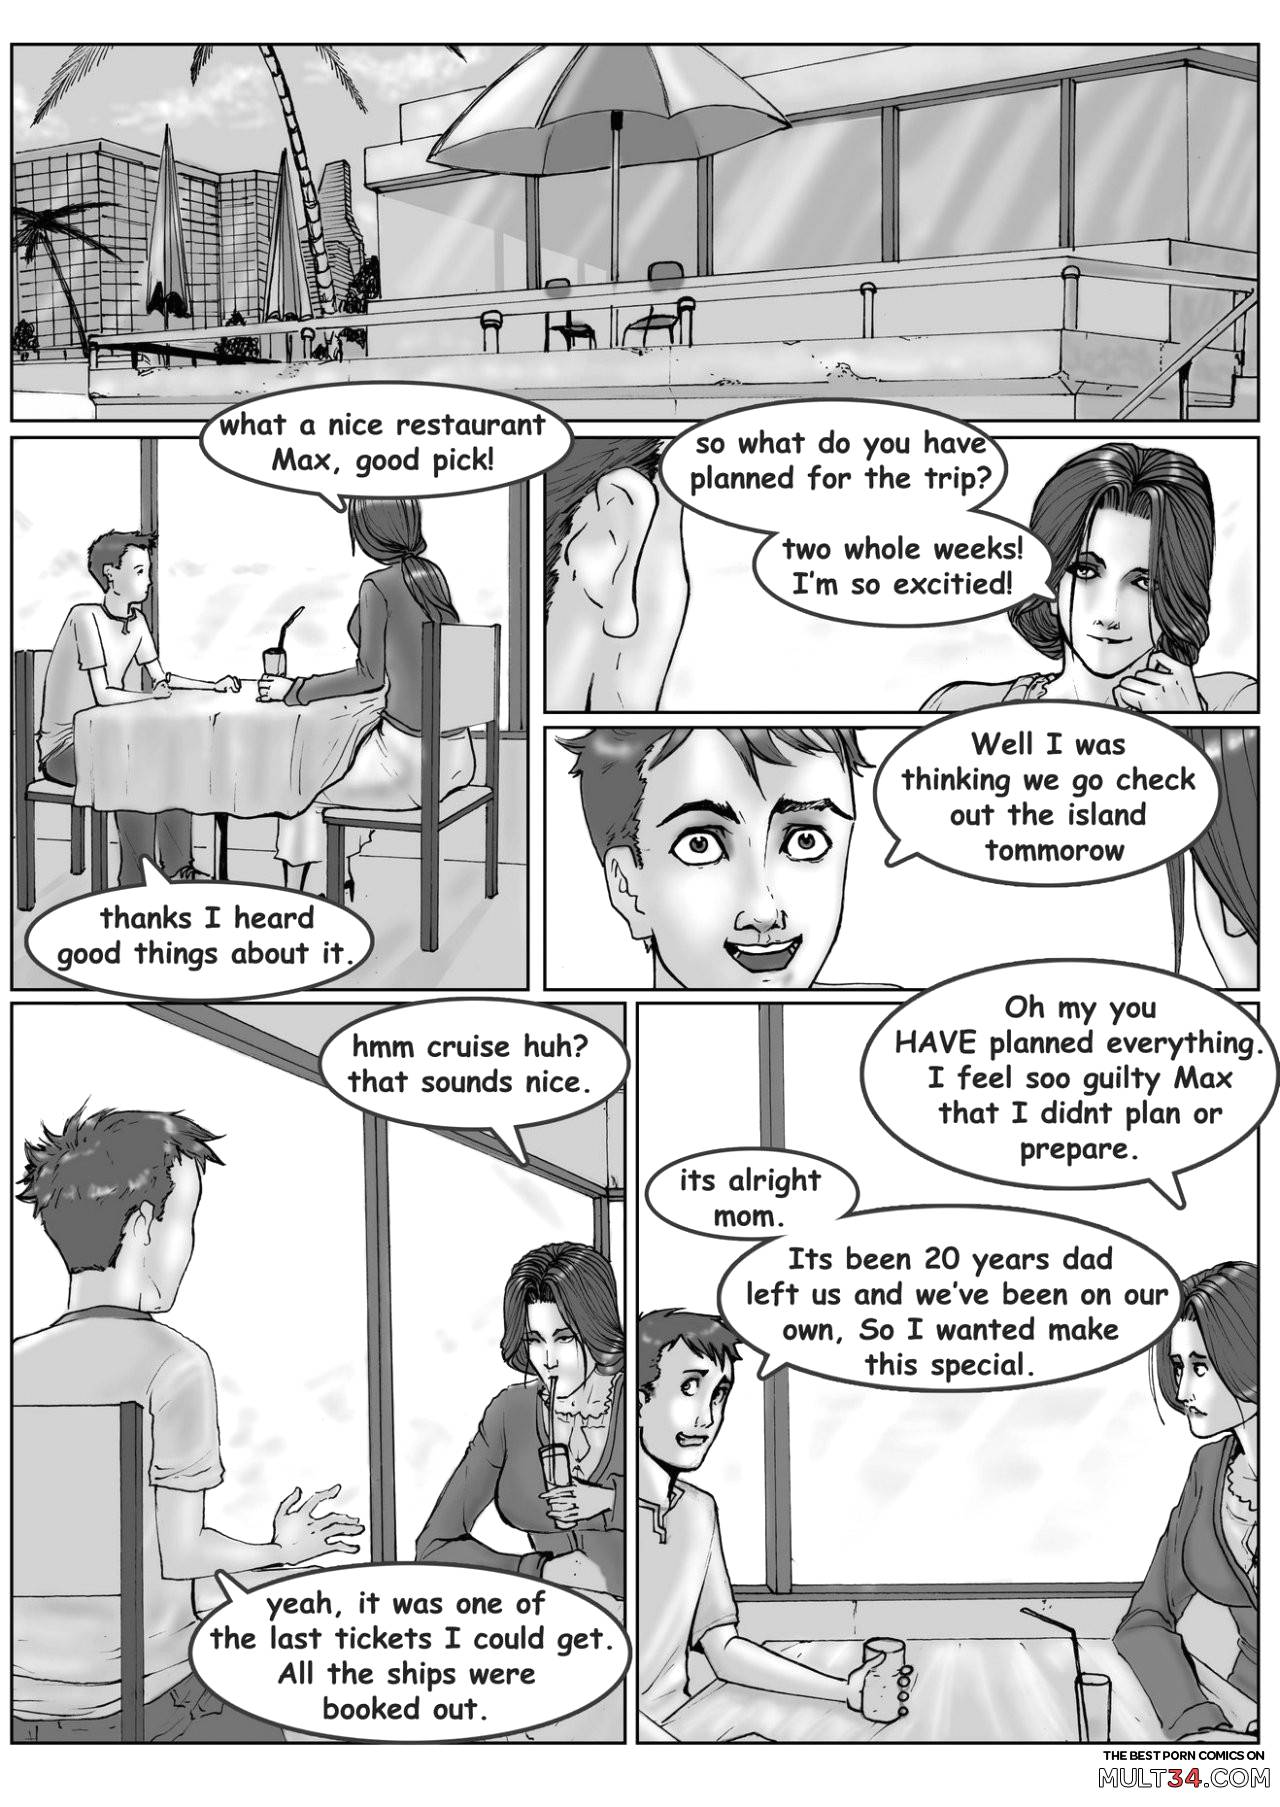 Max and Maddie's Island Quest: Part 1: Jocasta page 4